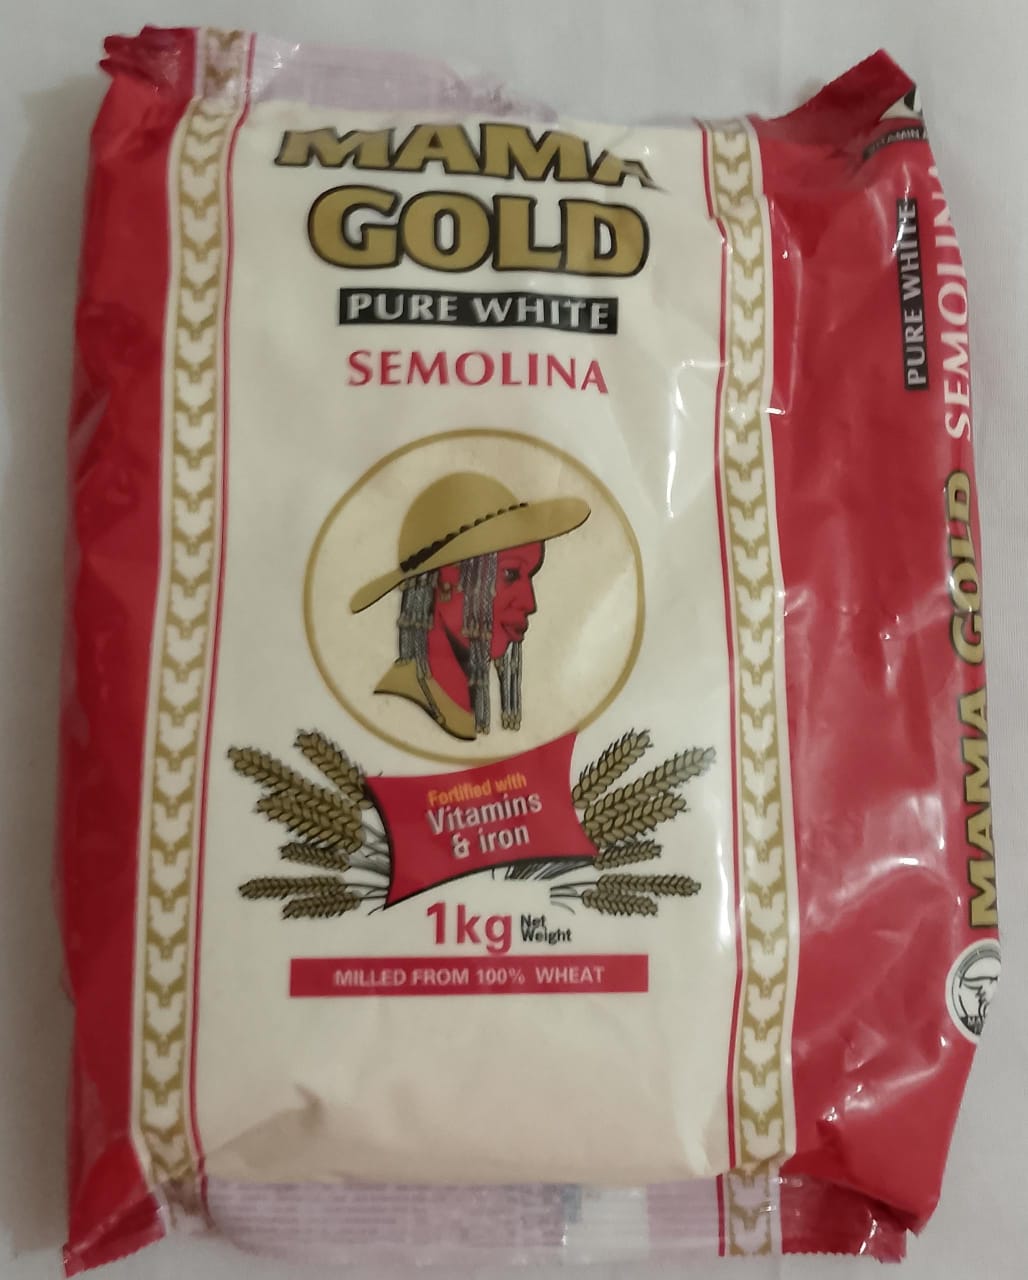 Best Selling Mama Gold Pure White Semolina Fortified With Vitamin s And Iron 1kg | DNF18a